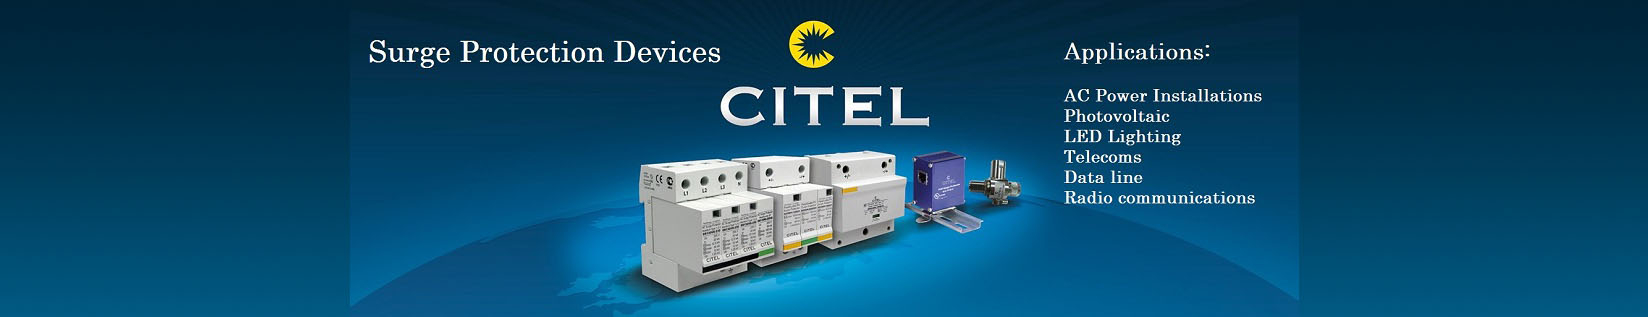 /Products/citel-surge-protection-devices